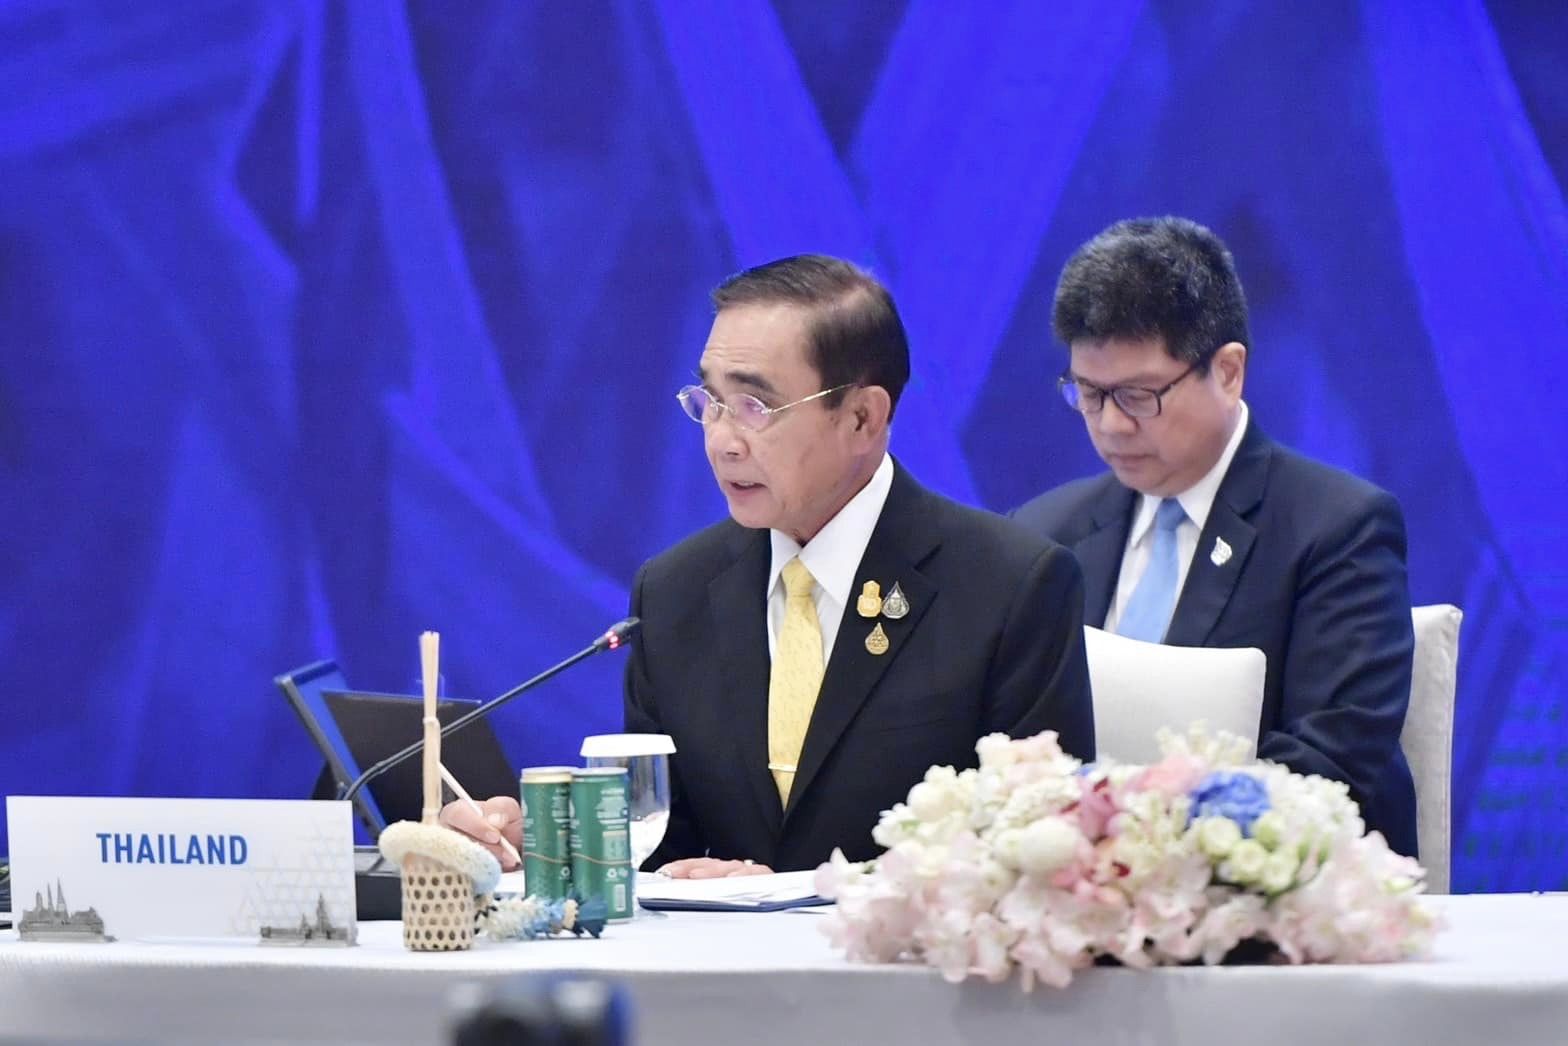 Prayut Chan-o-cha, Prime Minister of Thailand at the APEC Summit 2022